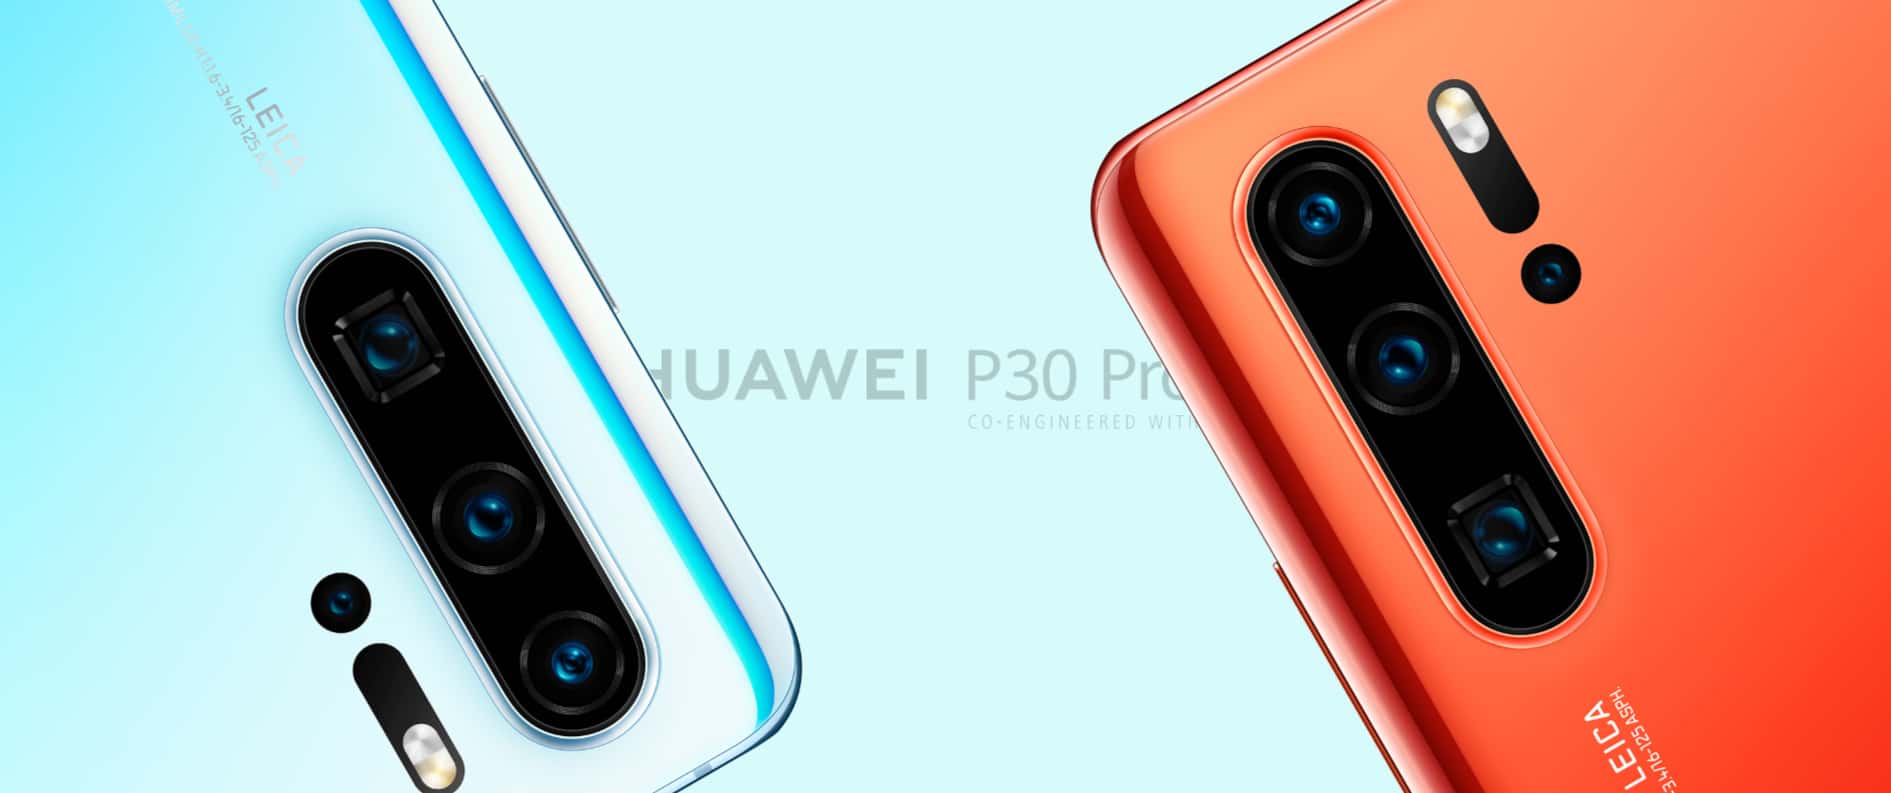 huawei p30 and p30 pro